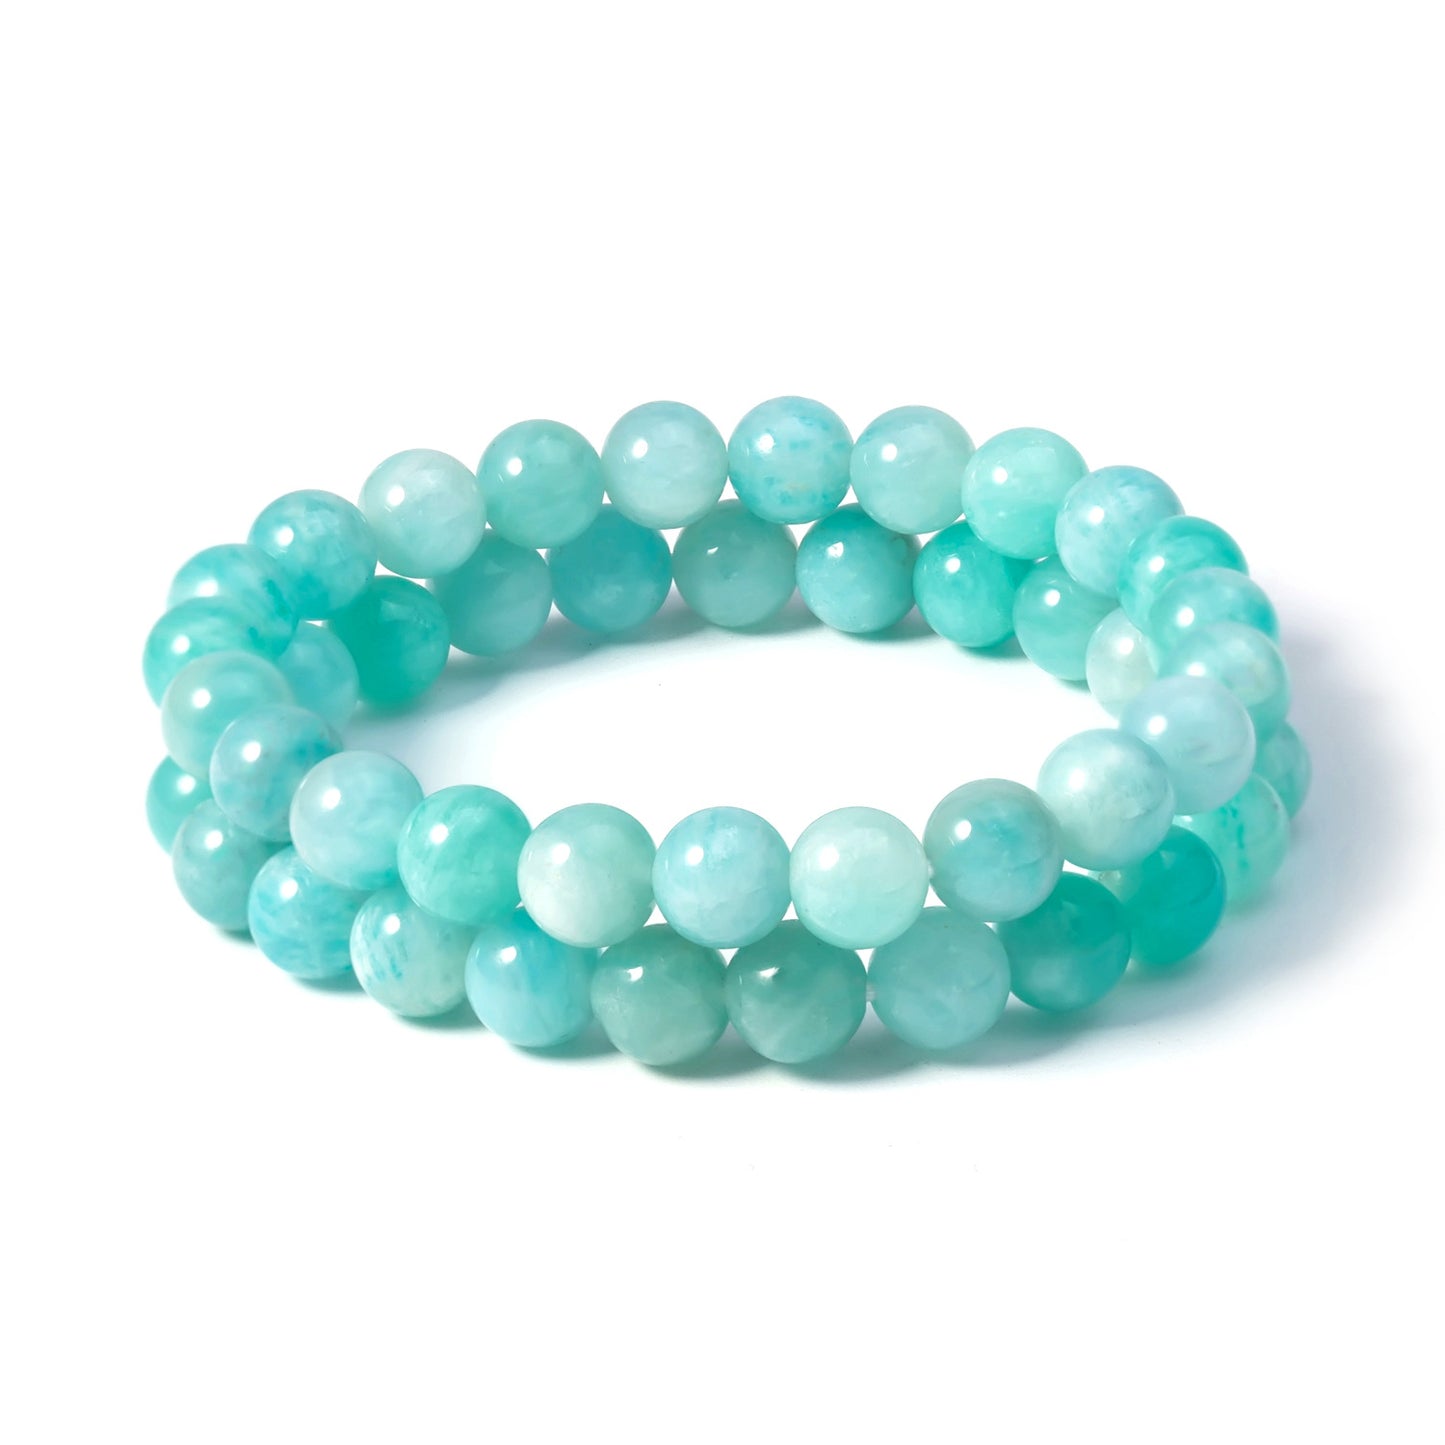 Amazonite Bracelet Polished - 8mm Beads -Approx 7.5 Inch